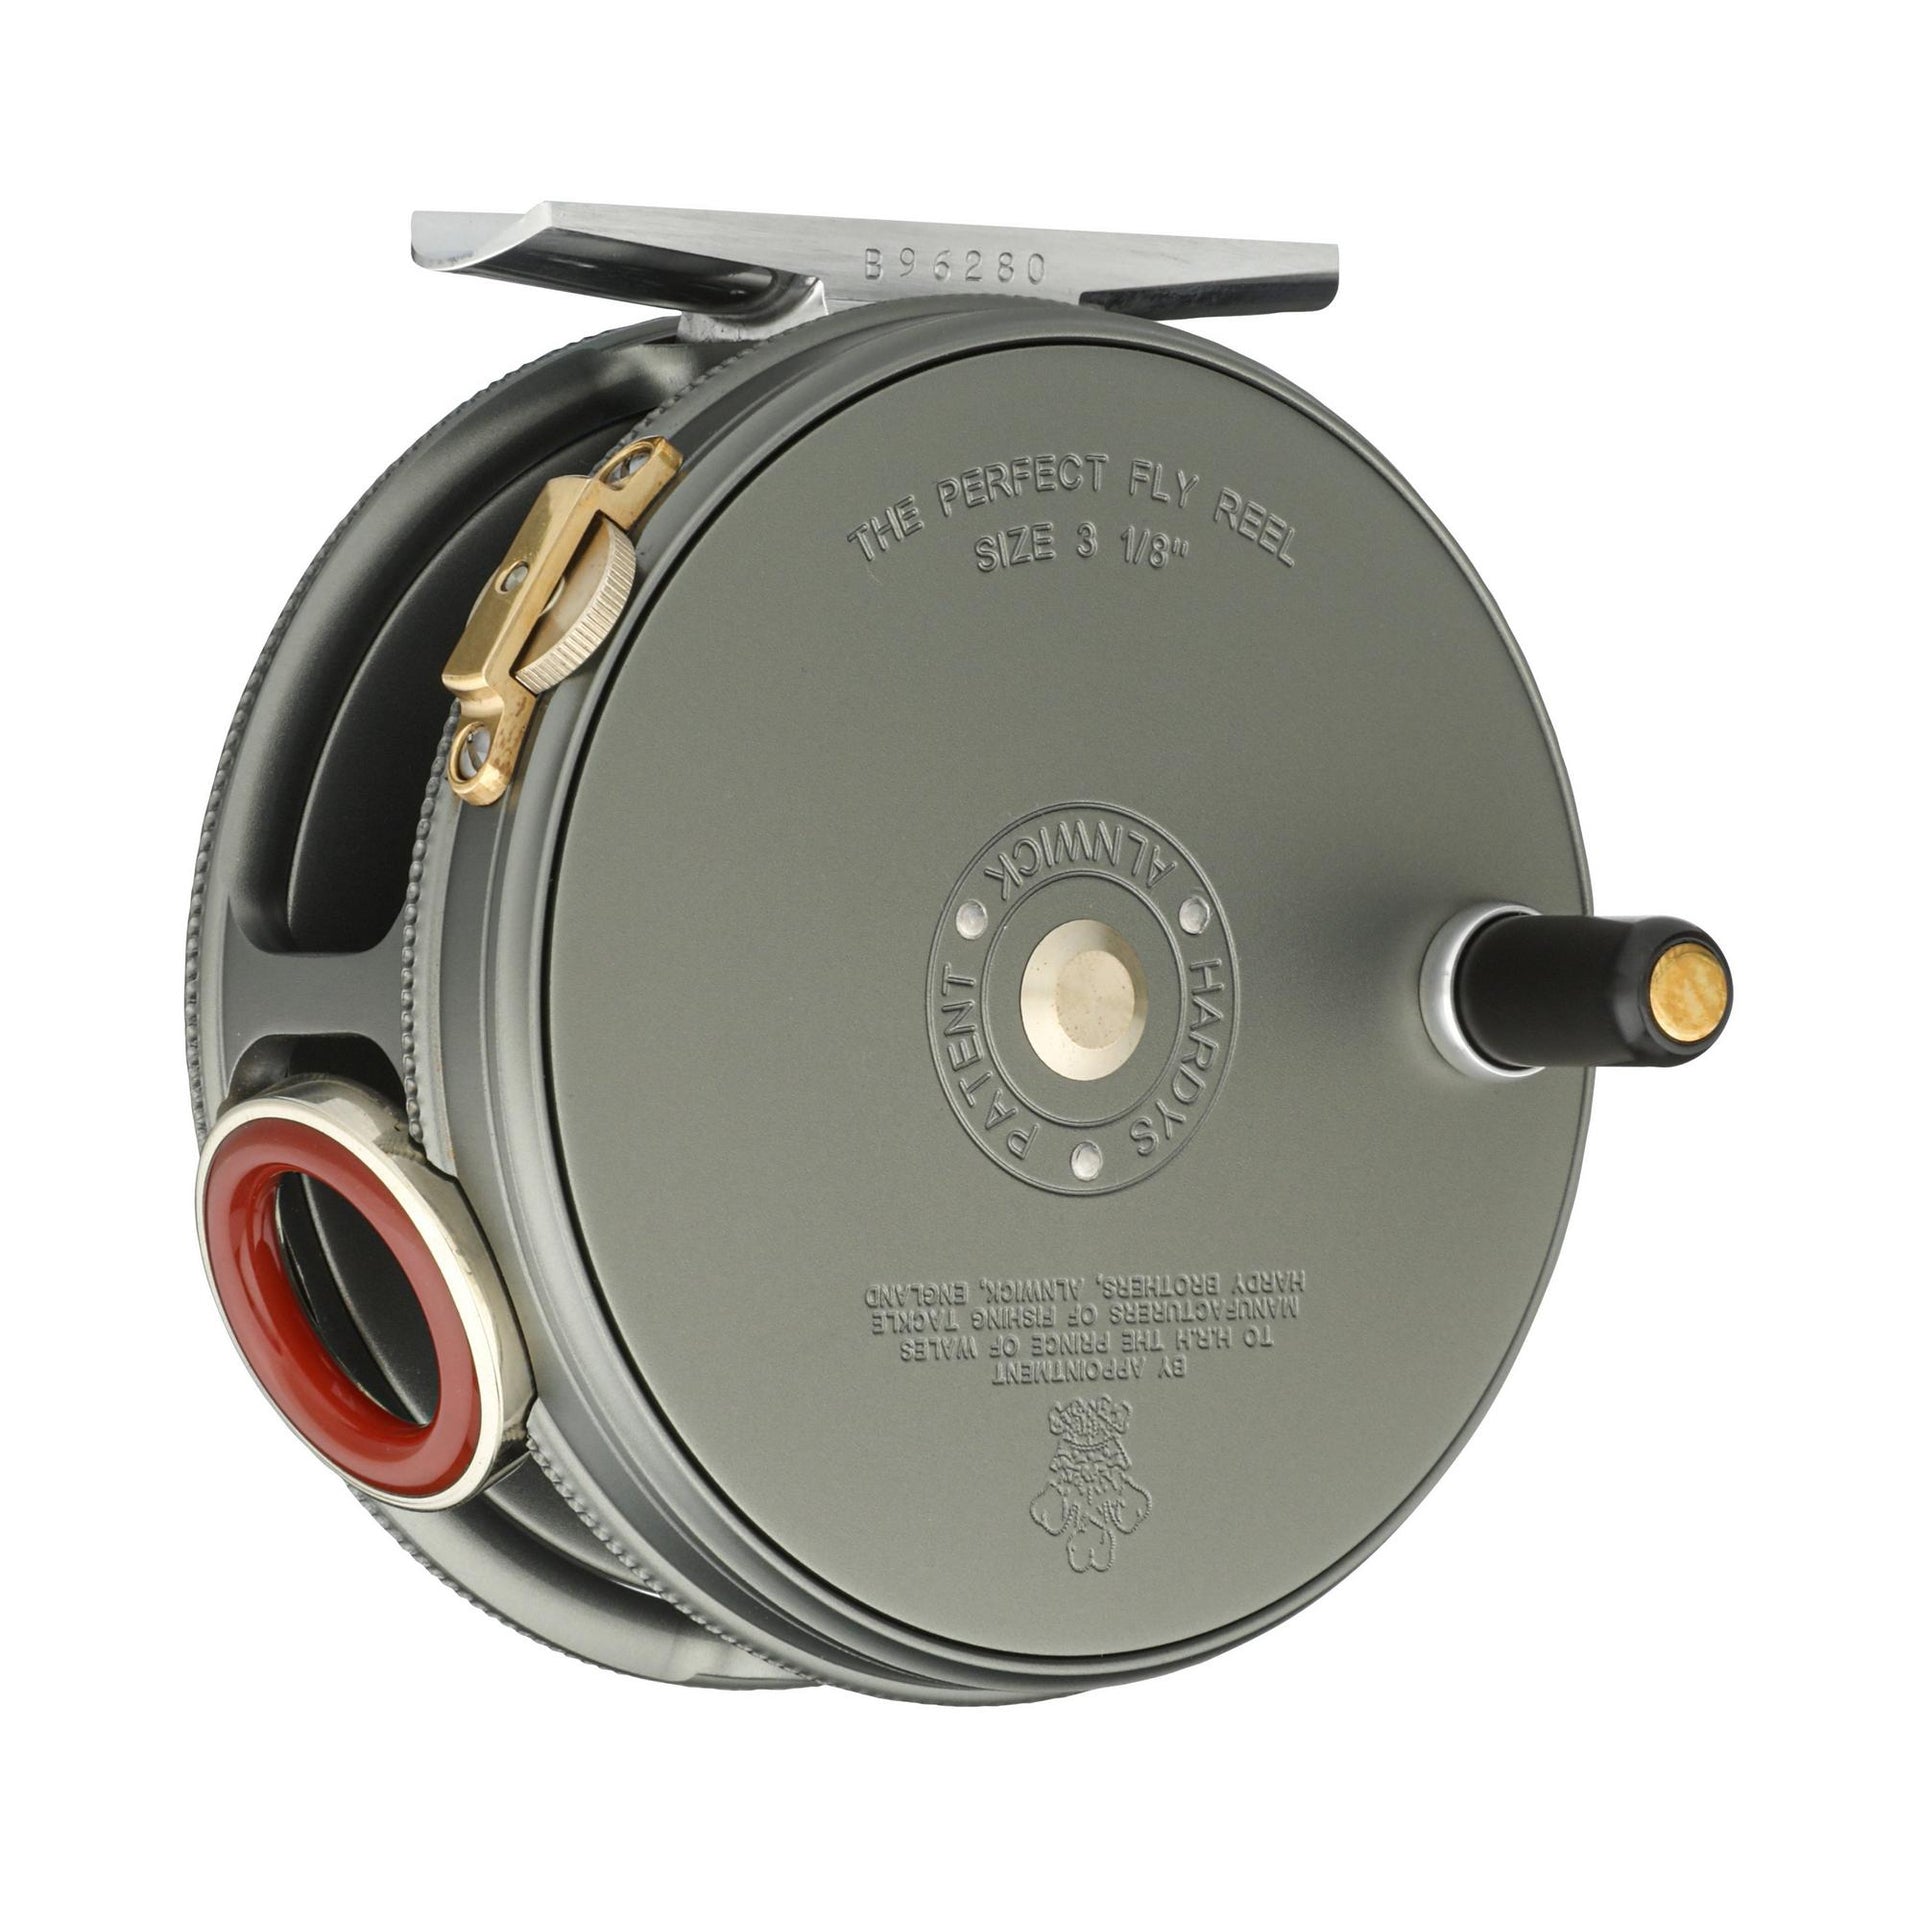 Hardy Uniqua Fly Fishing Reel. 3 1/8. 1912 Check. Made in England.